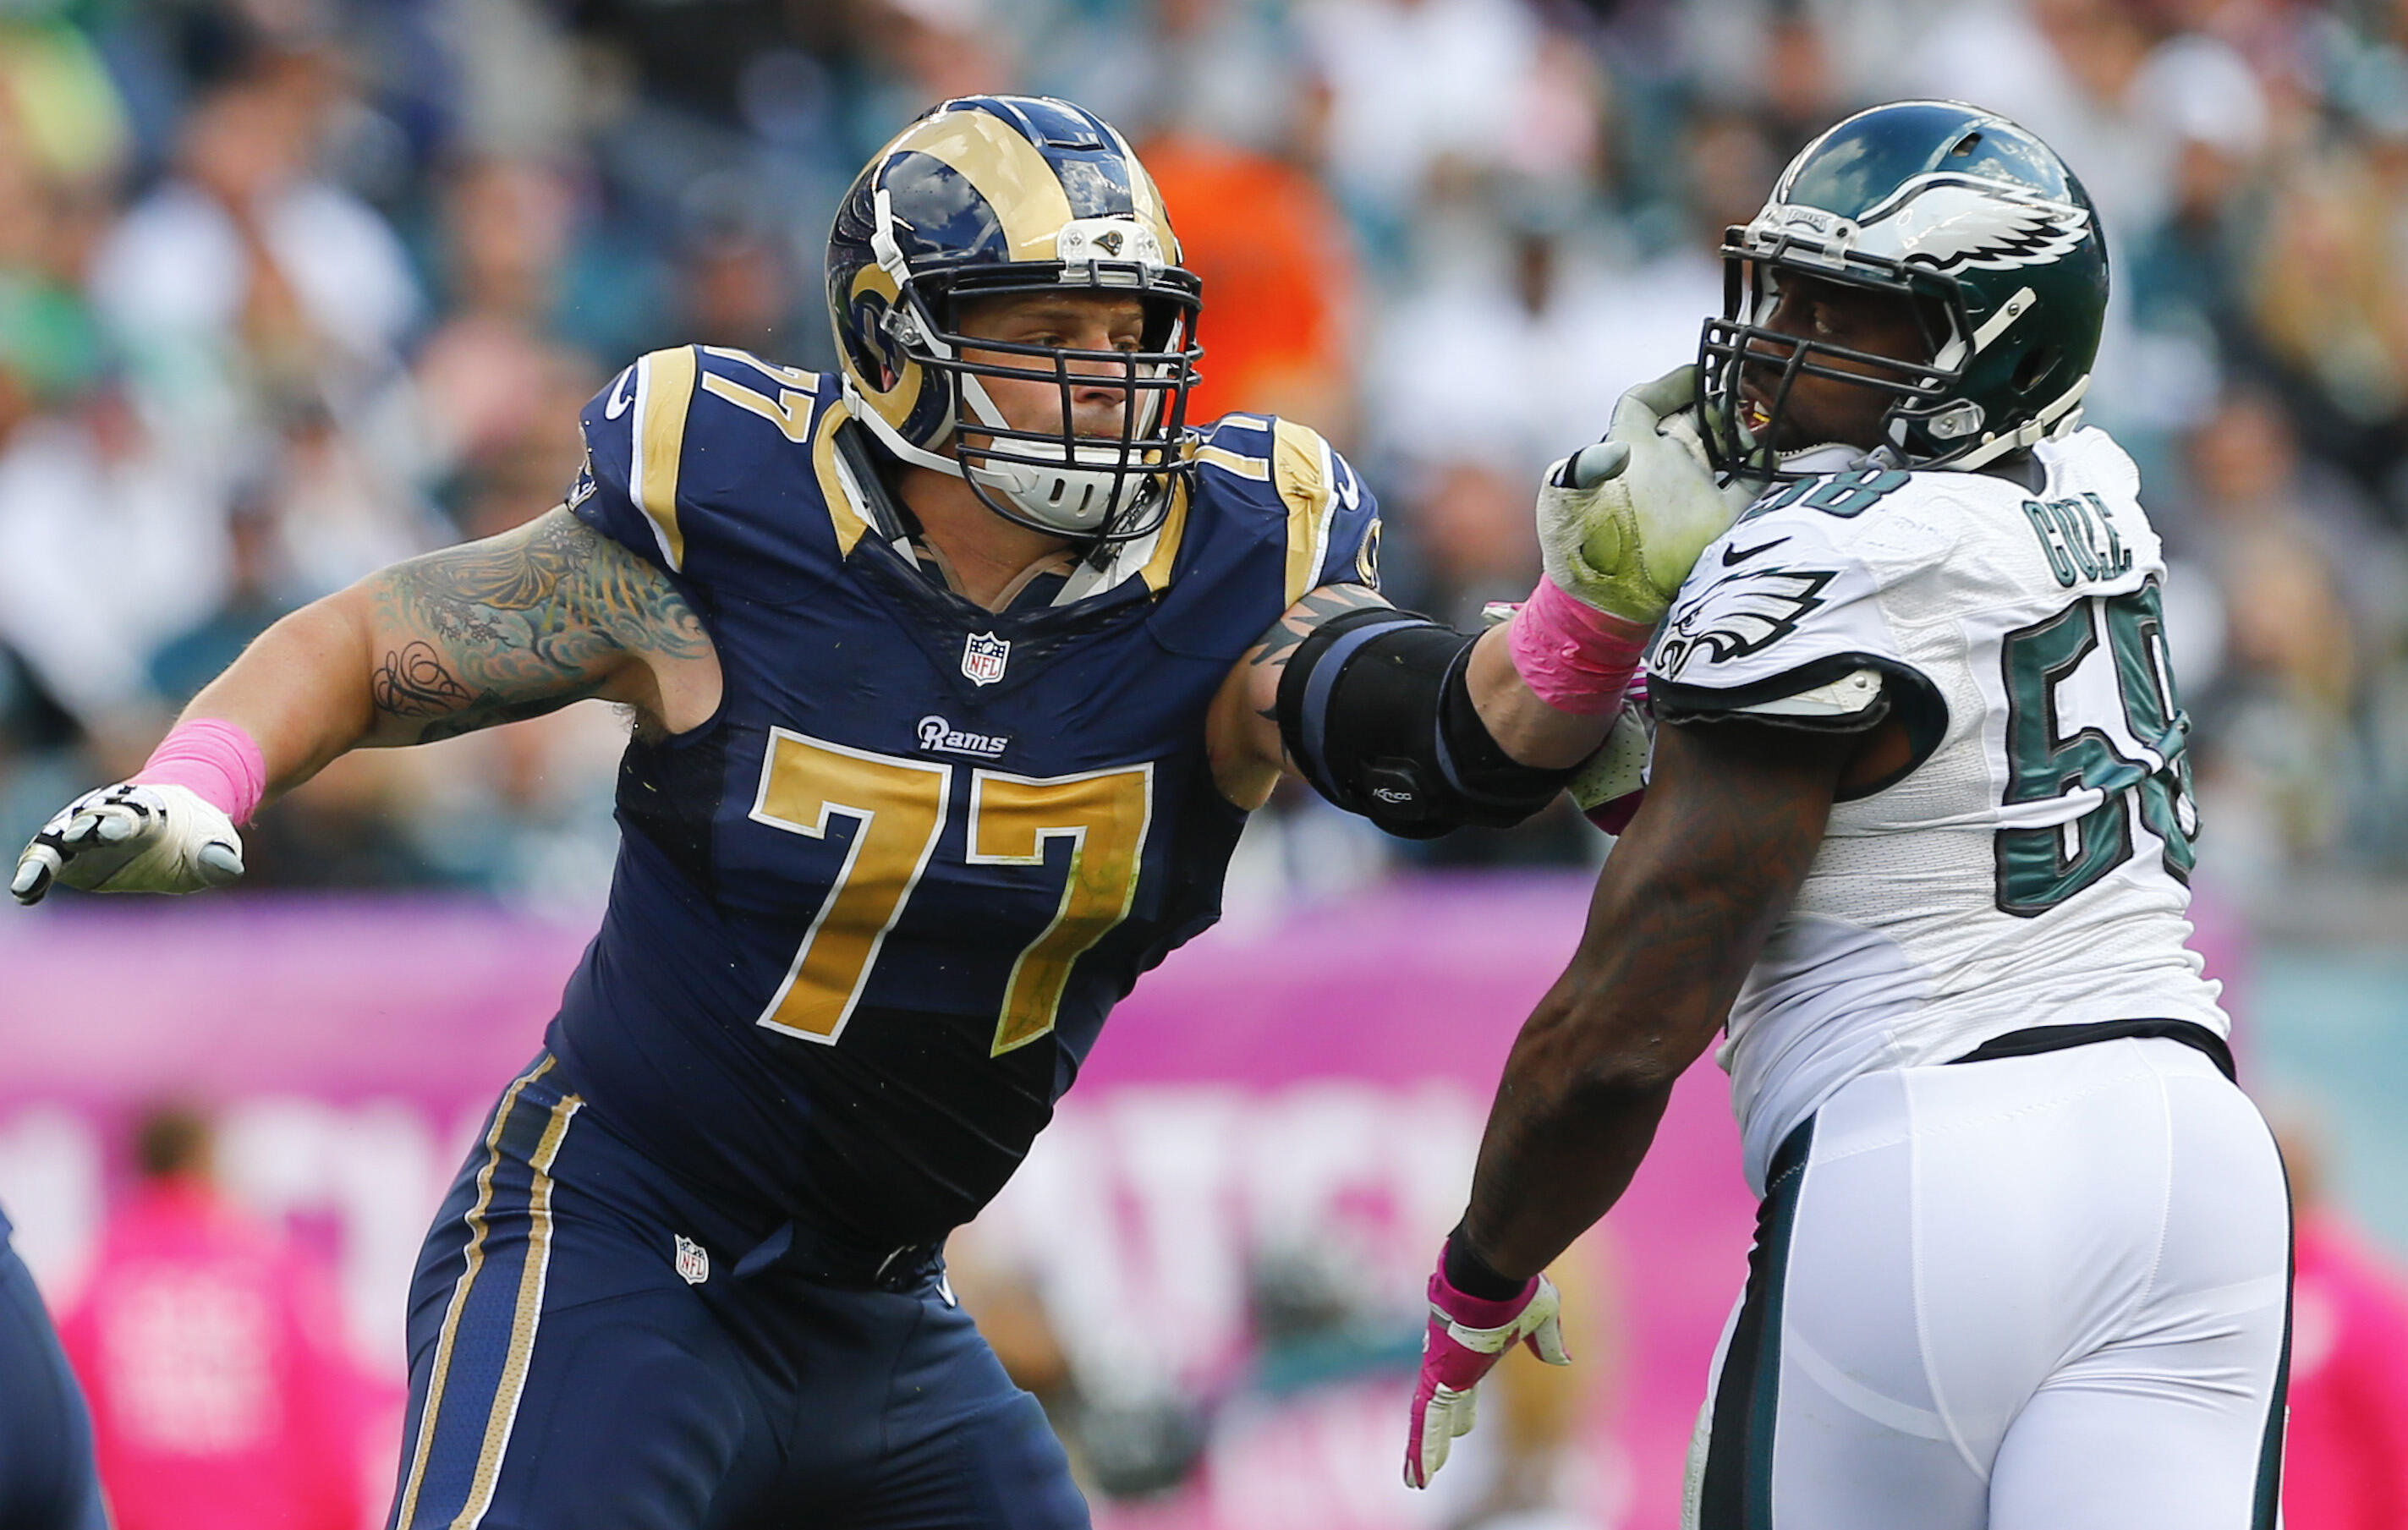 PHILADELPHIA, PA - OCTOBER 5: Offensive tackle Jake Long #77 of the St. Louis Rams blocks linebacker Trent Cole #58 of the Philadelphia Eagles in the third quarter on October 5, 2014 at Lincoln Financial Field in Philadelphia, Pennsylvania. (Photo by Rich